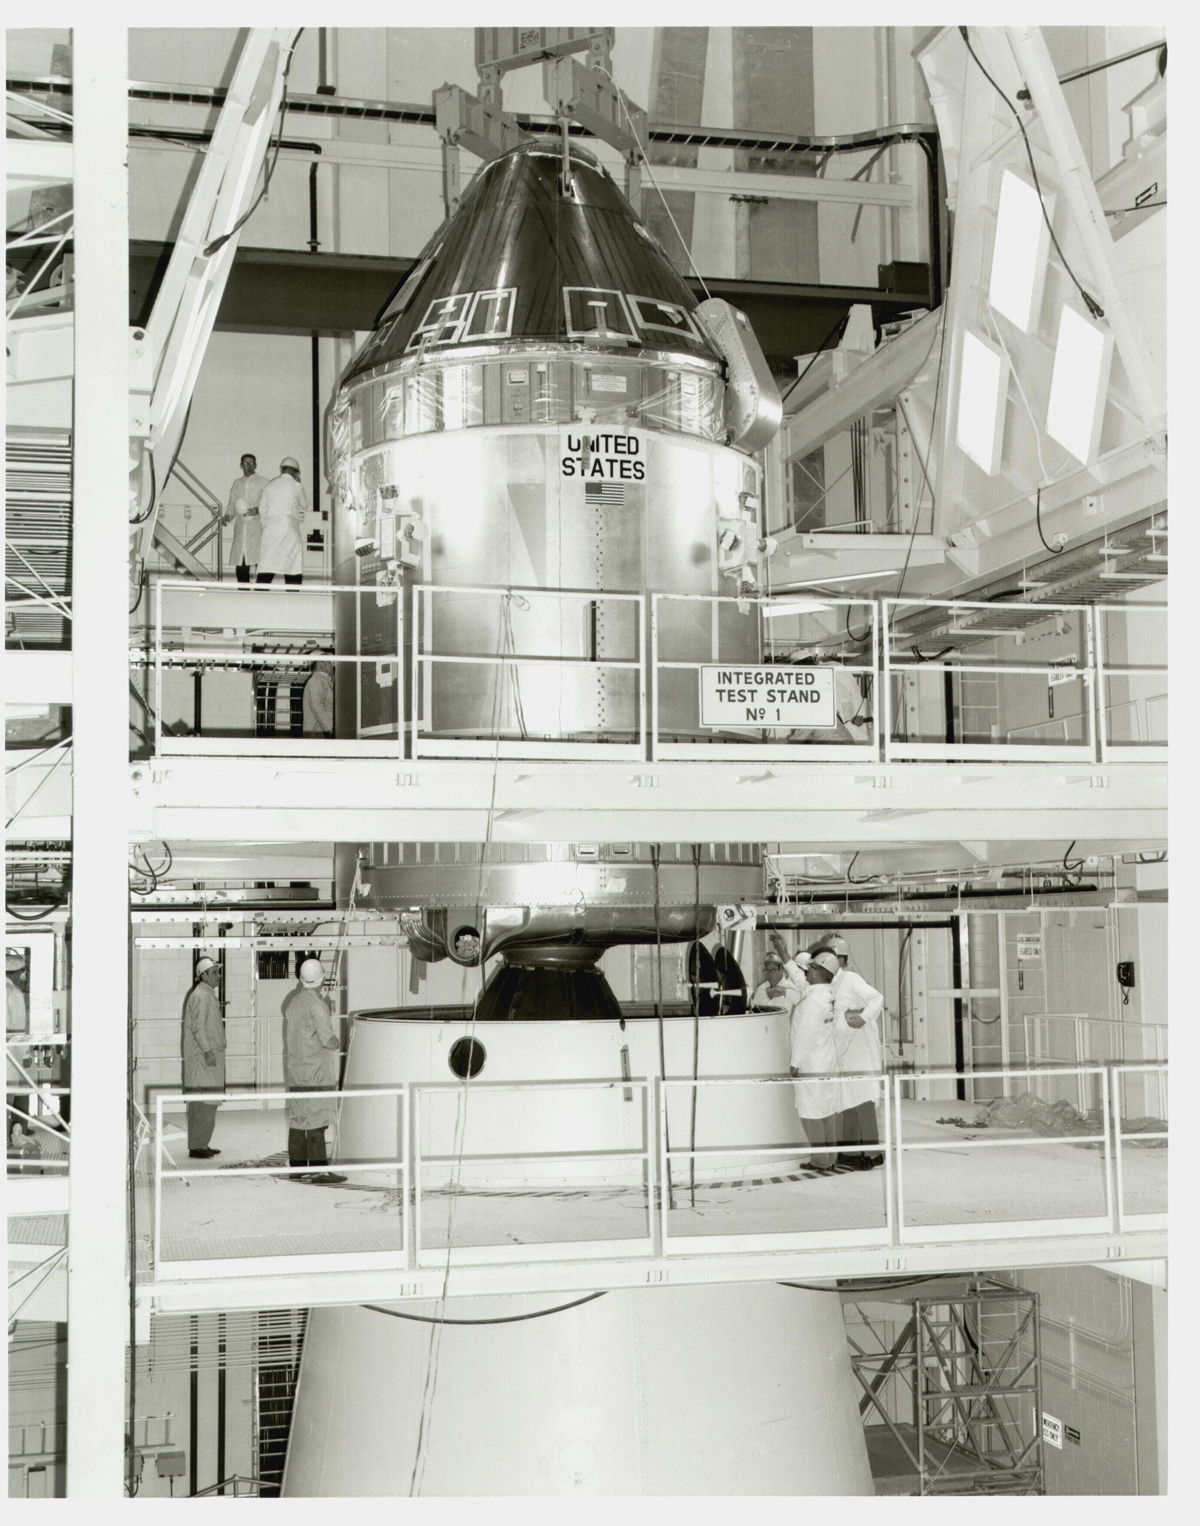 Apollo 11 Command and Service Module, taking up multiple scaffolded floors of an indoor facility, with people working on the upper two floors